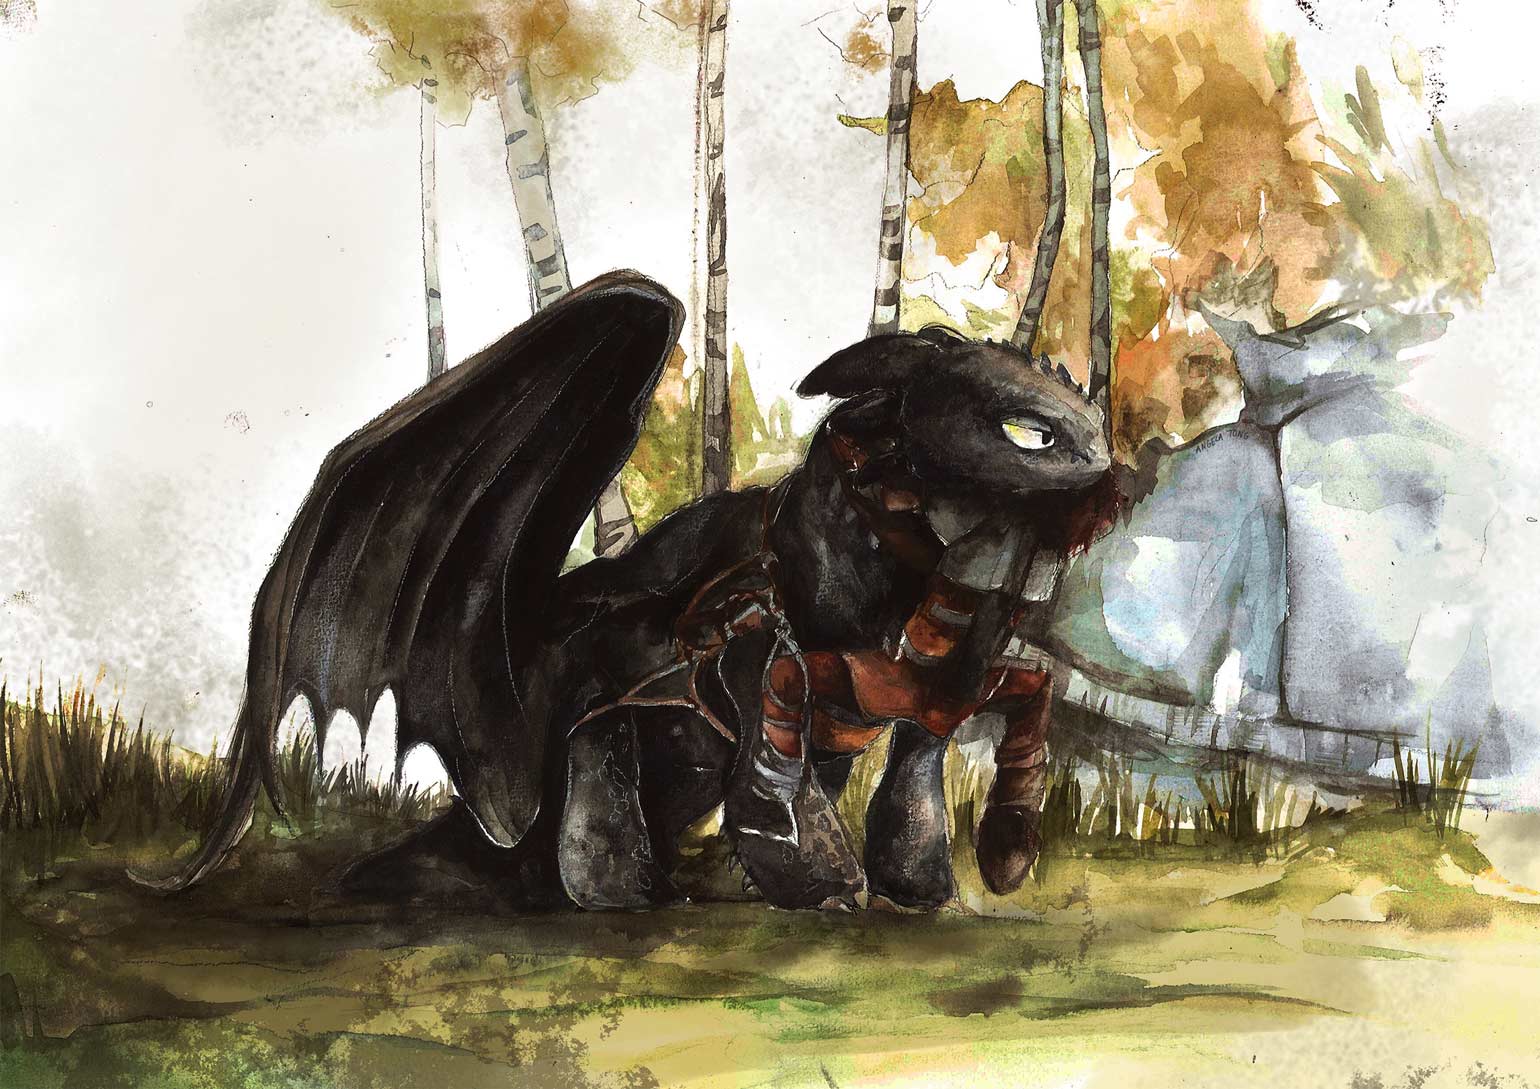 hiccup and astrid how to train your dragon 2 fan art